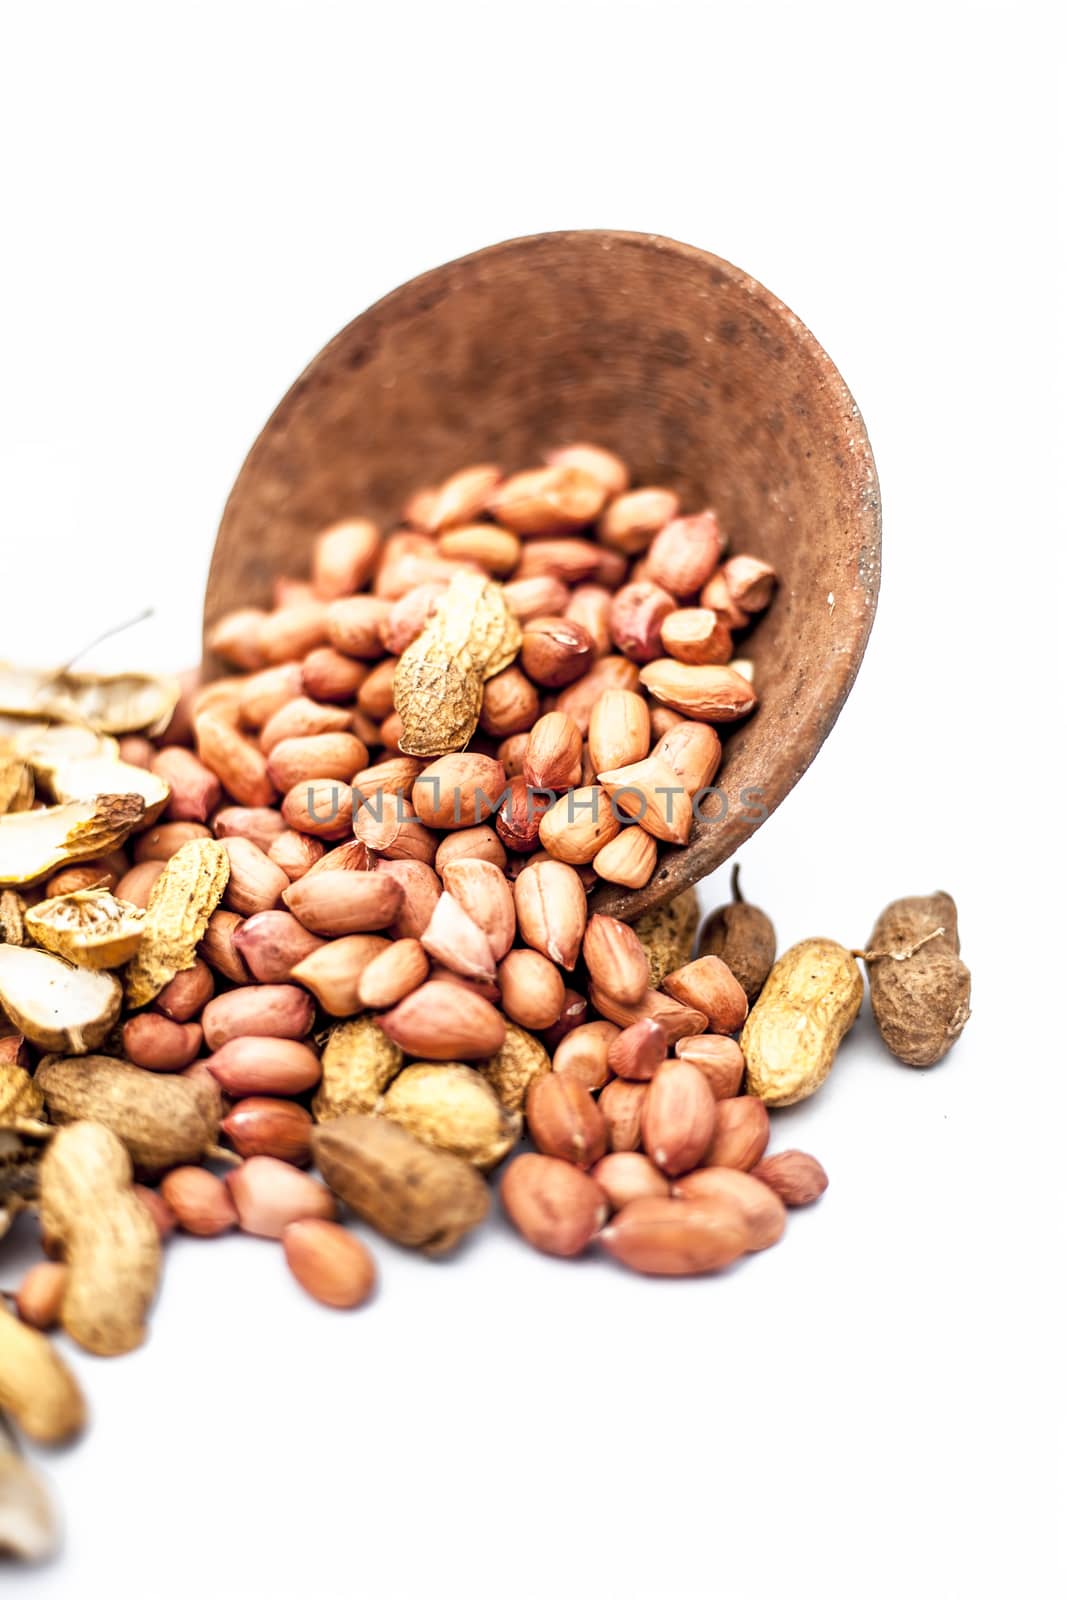 Raw organic groundnut or peanuts isolated on white with raw peanuts in a hamper with peanuts in clay bowl. by mirzamlk